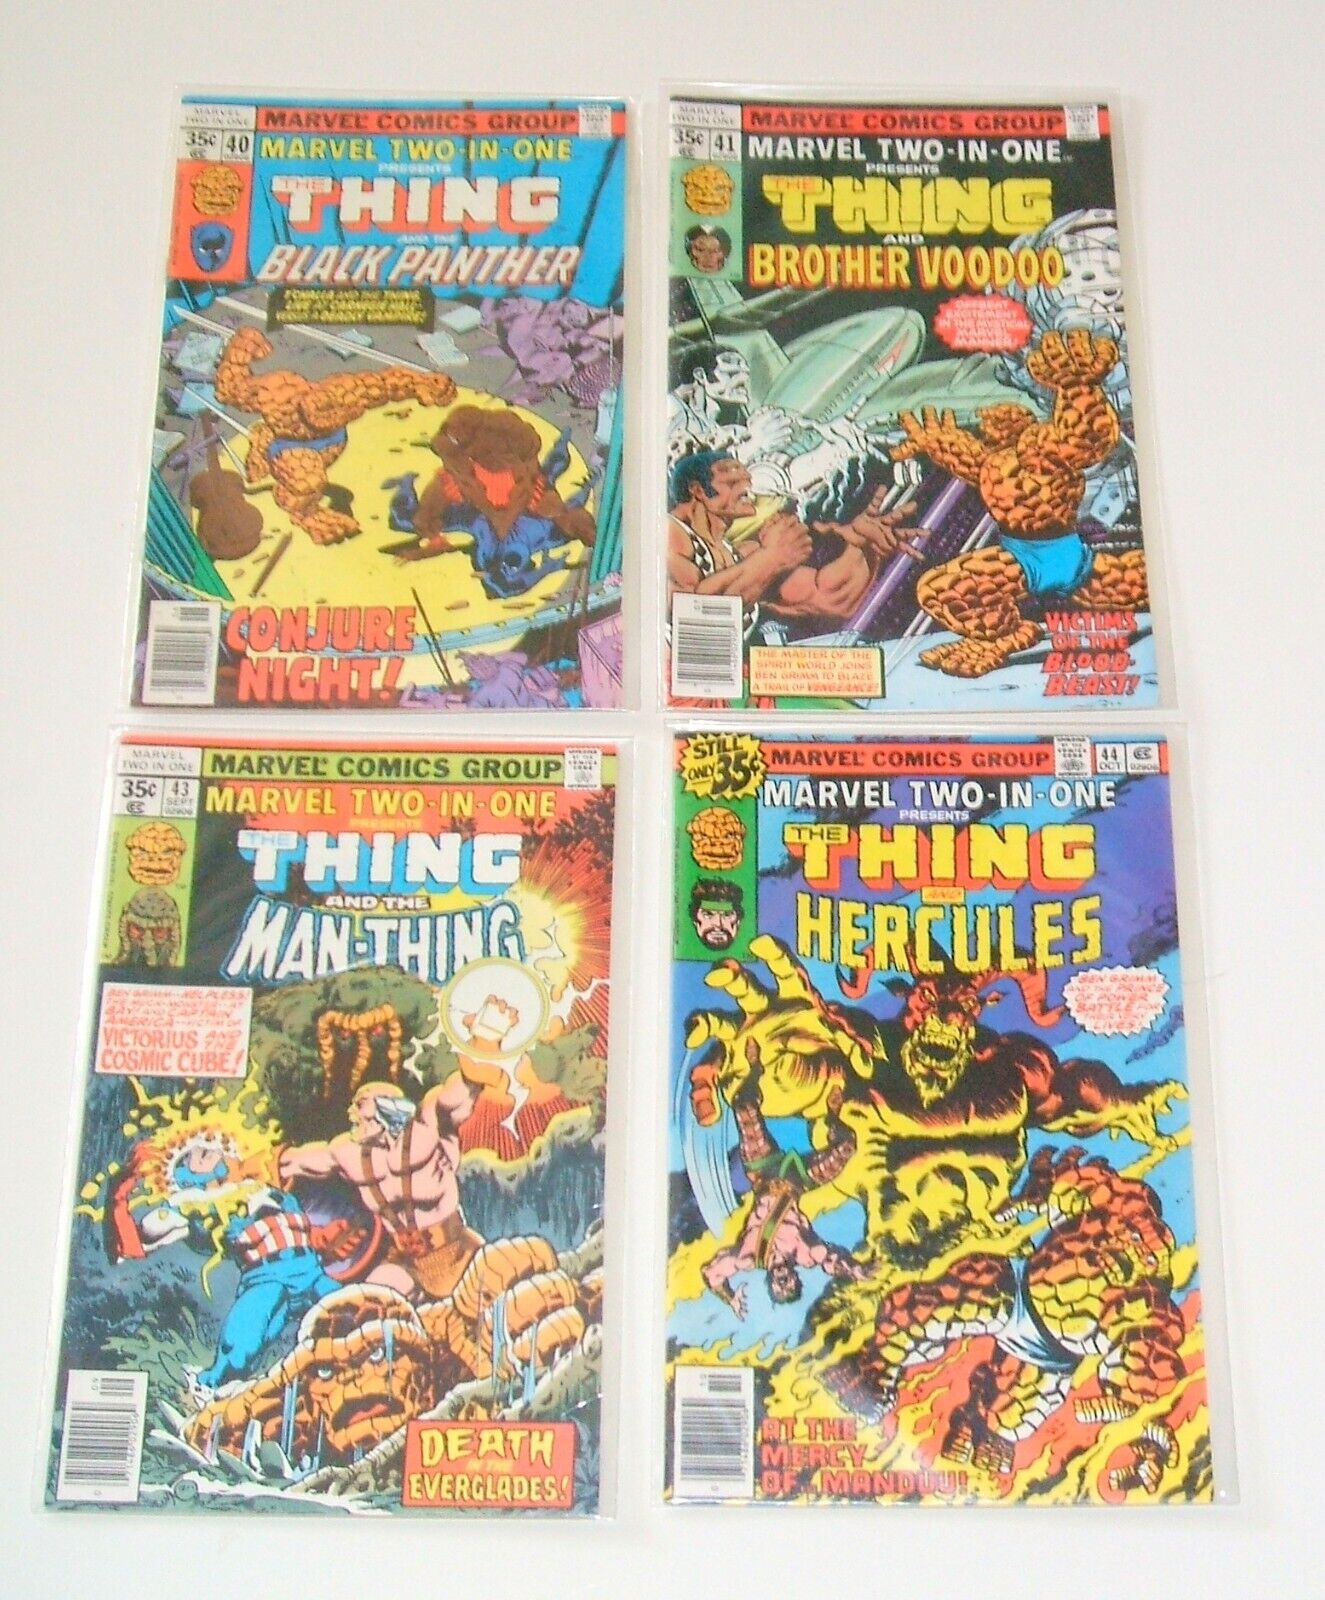 Marvel Comics Group Two-in-One The Thing Lot of 4 #40  #41  #43 #44